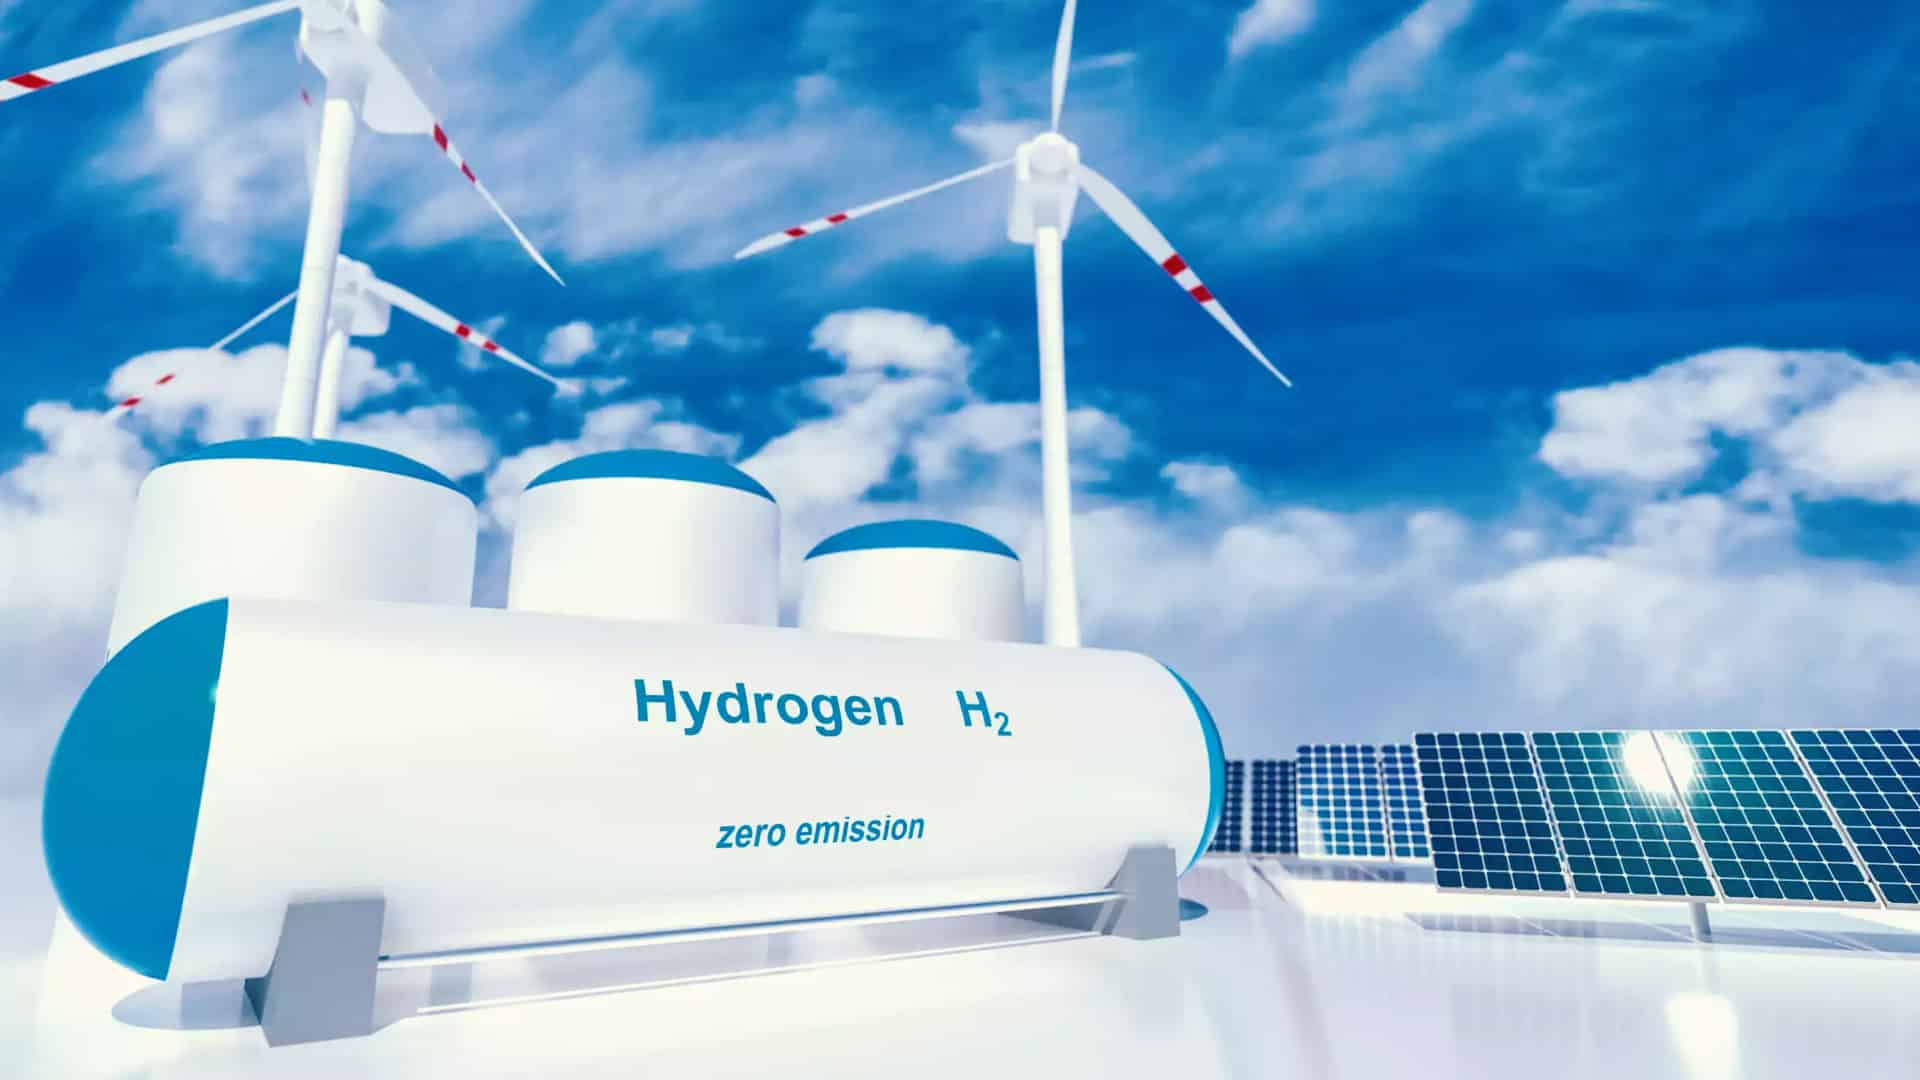 Amplus Solar plans Rs 1,500-crore investment in Andhra Pradesh to set up distributed green hydrogen plants